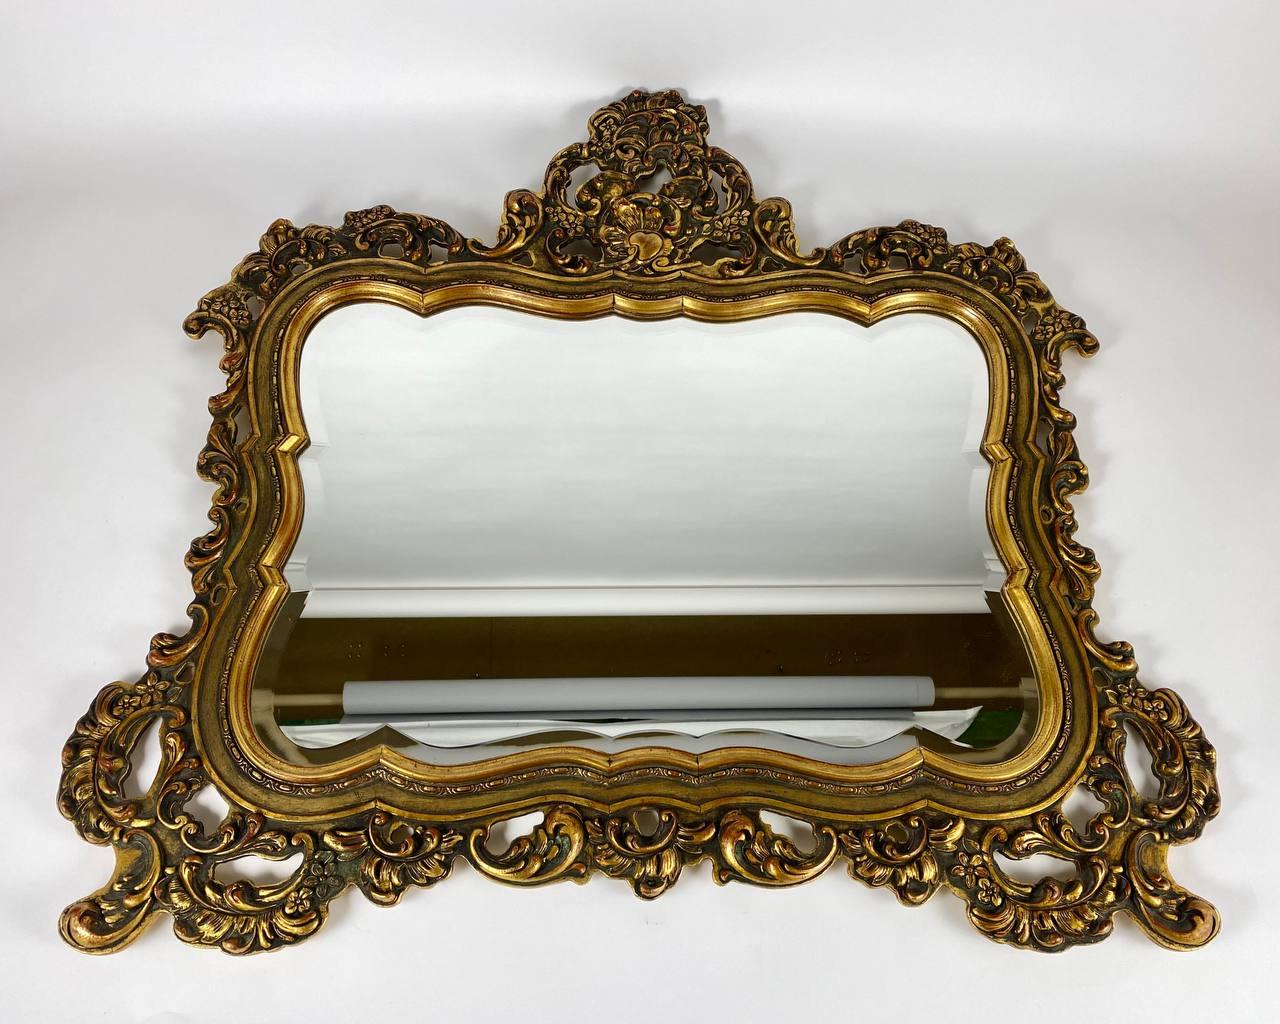 Vintage carved giltwood mirror, Mid-20th century.

Faceted wall mirror with golden rectangular ornate Baroque frame. Perfect for over-console bedroom, foyer or living room.

The rectangular shaped mirror with pierced scrolled acanthus cresting